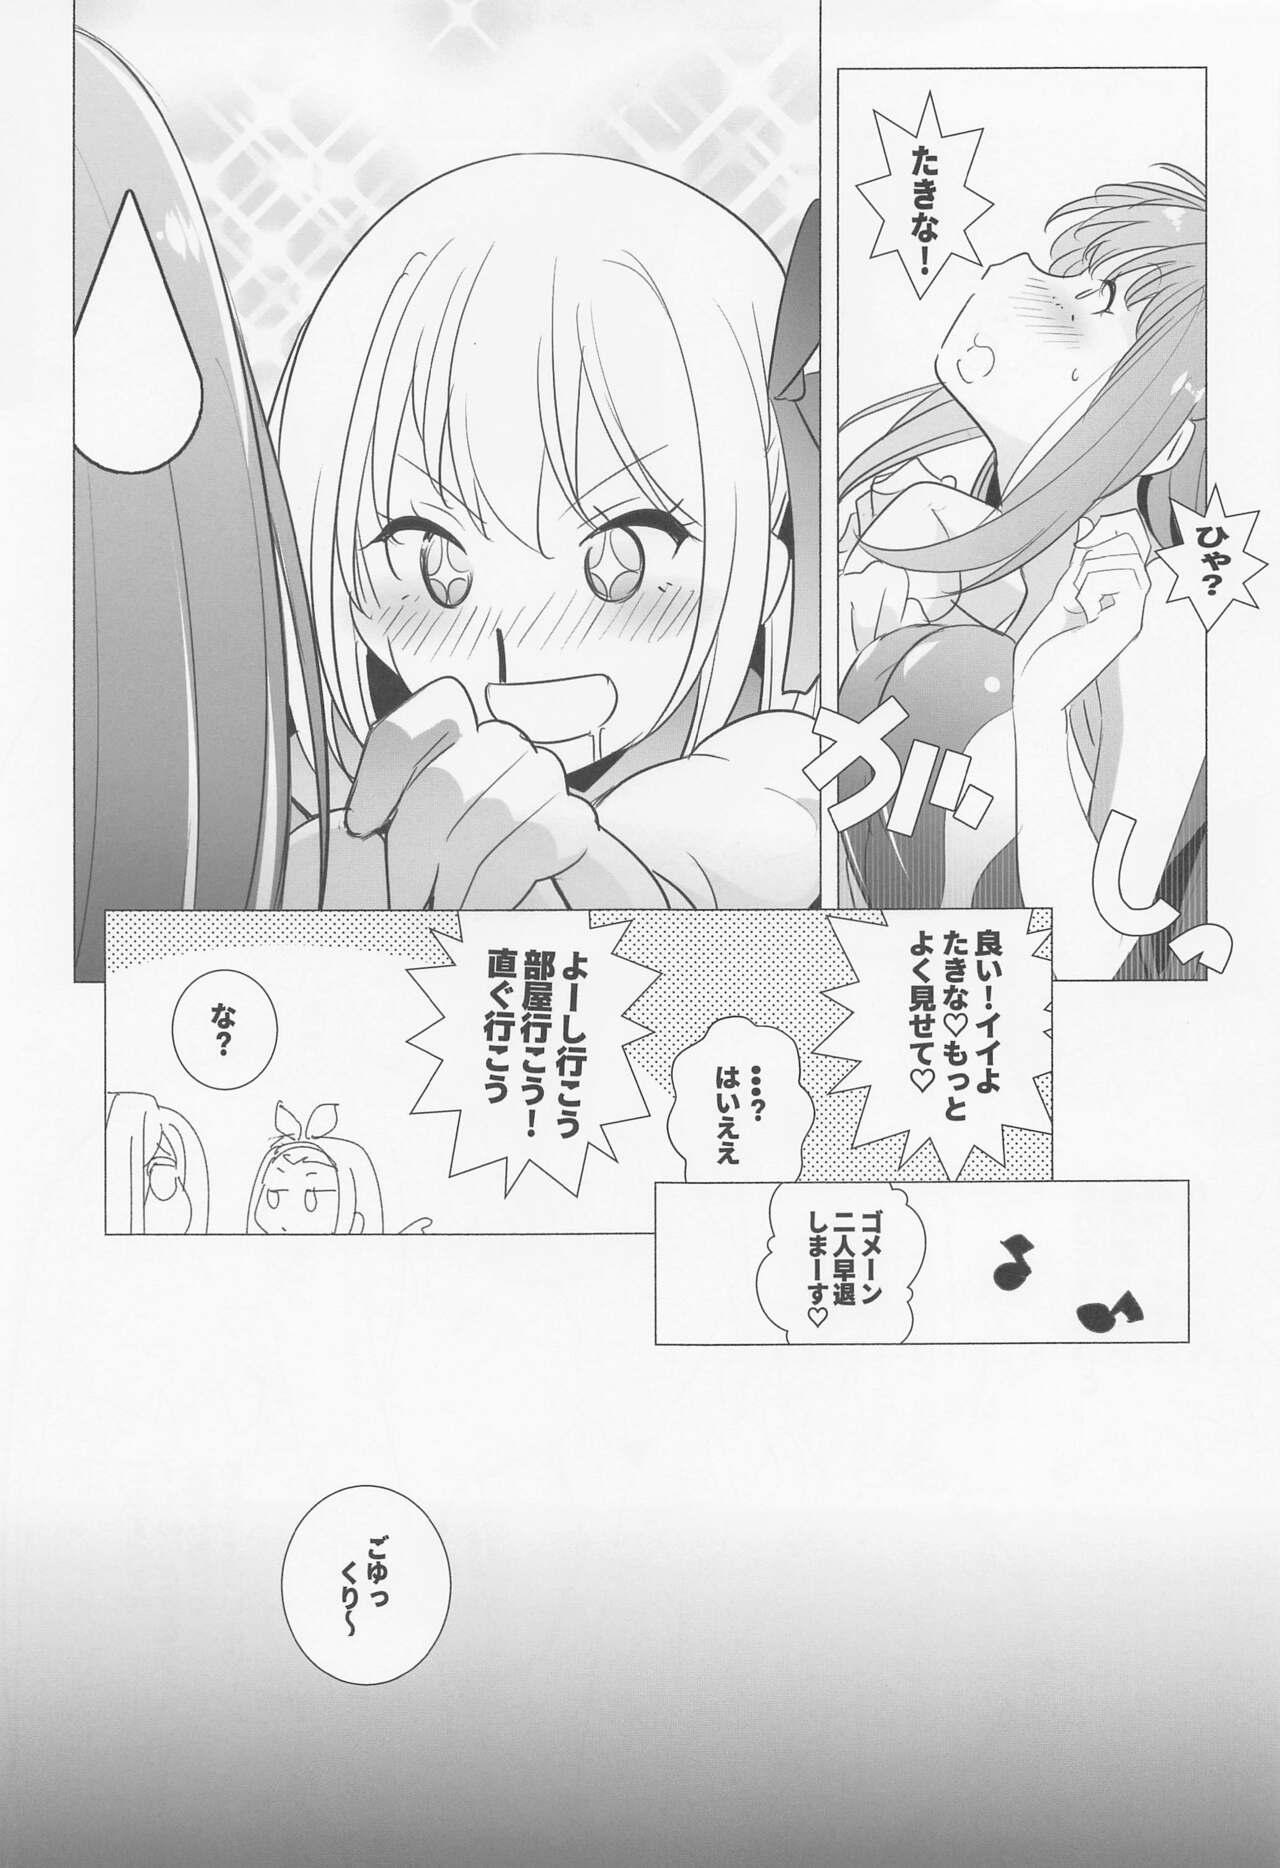 Man INTER MISSION - Lycoris recoil Girl - Page 6